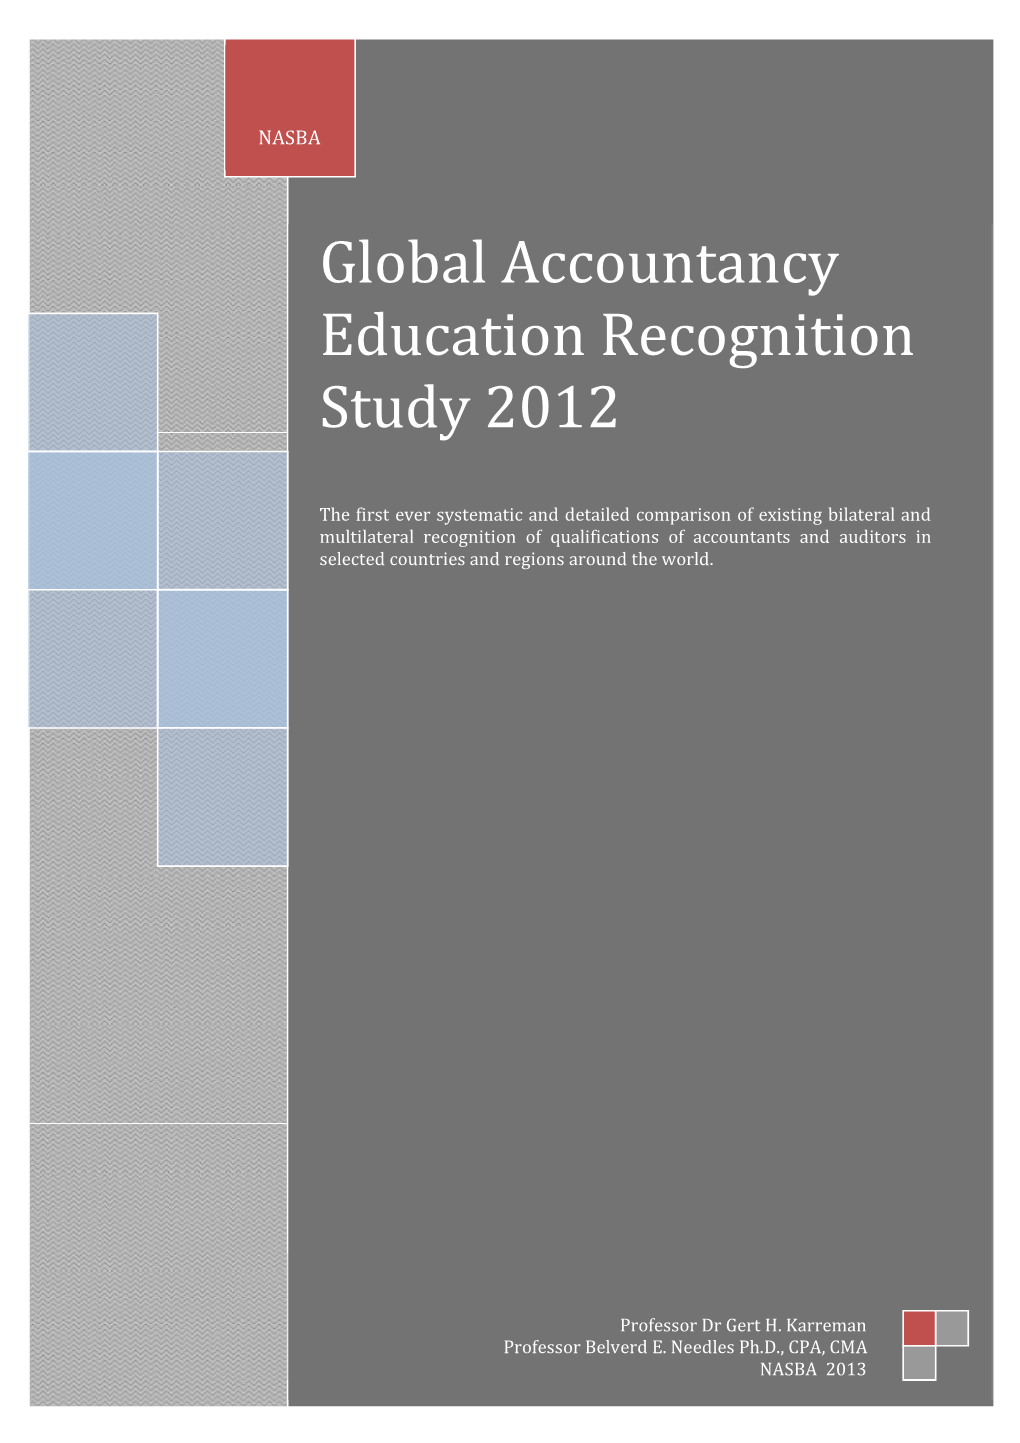 Global Accountancy Education Recognition Study 2012